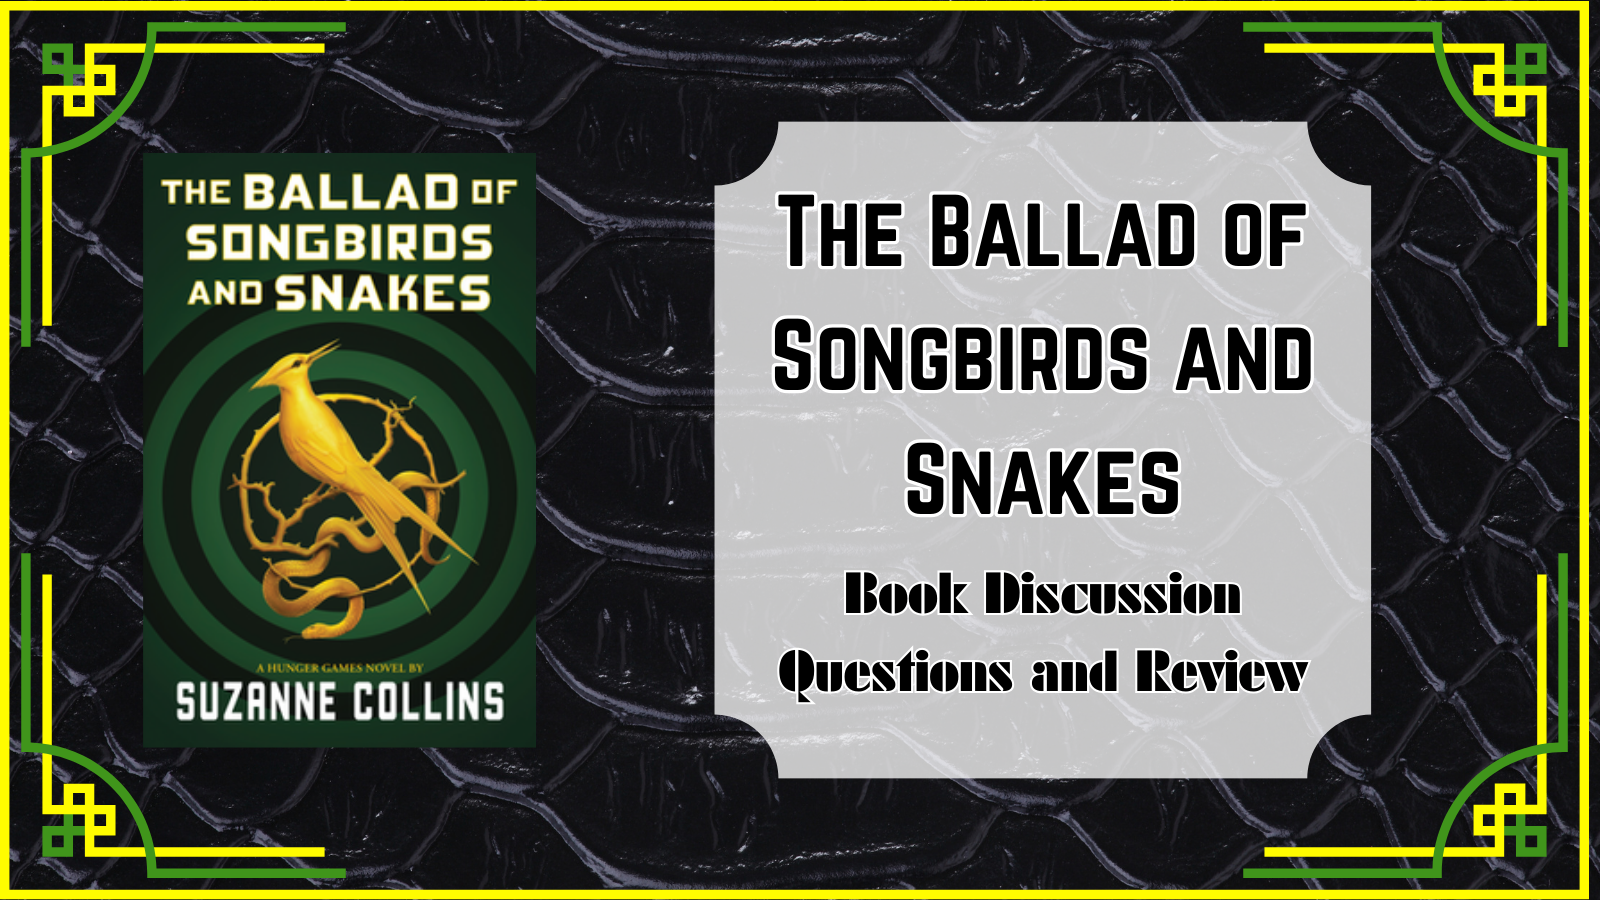 The ballad of Songbirds and Snakes Book